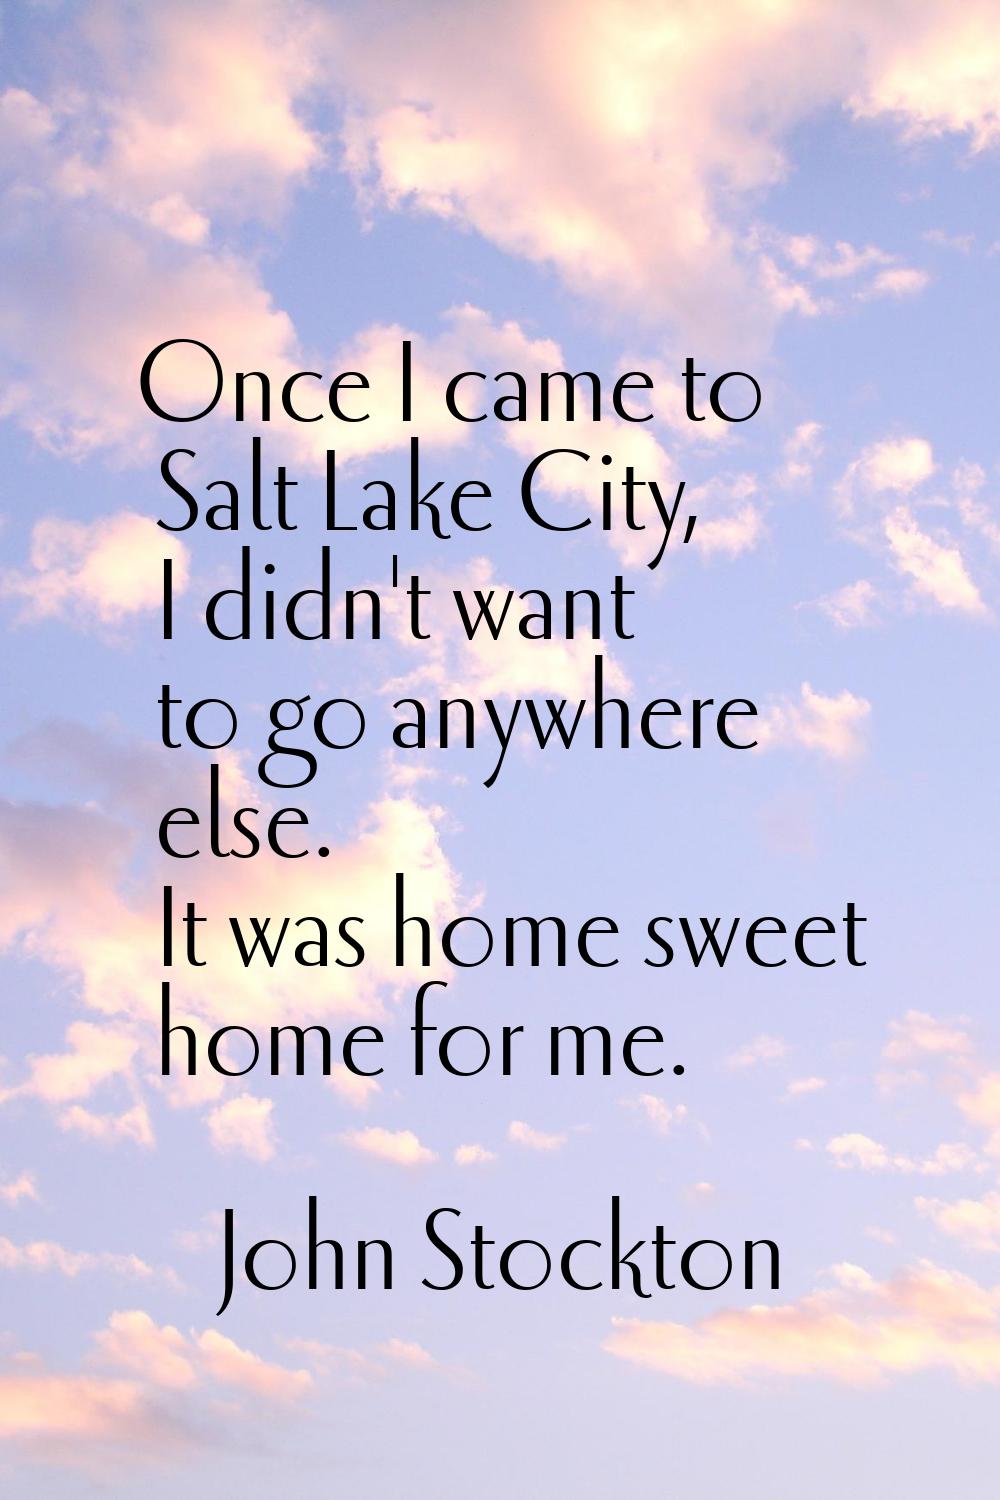 Once I came to Salt Lake City, I didn't want to go anywhere else. It was home sweet home for me.